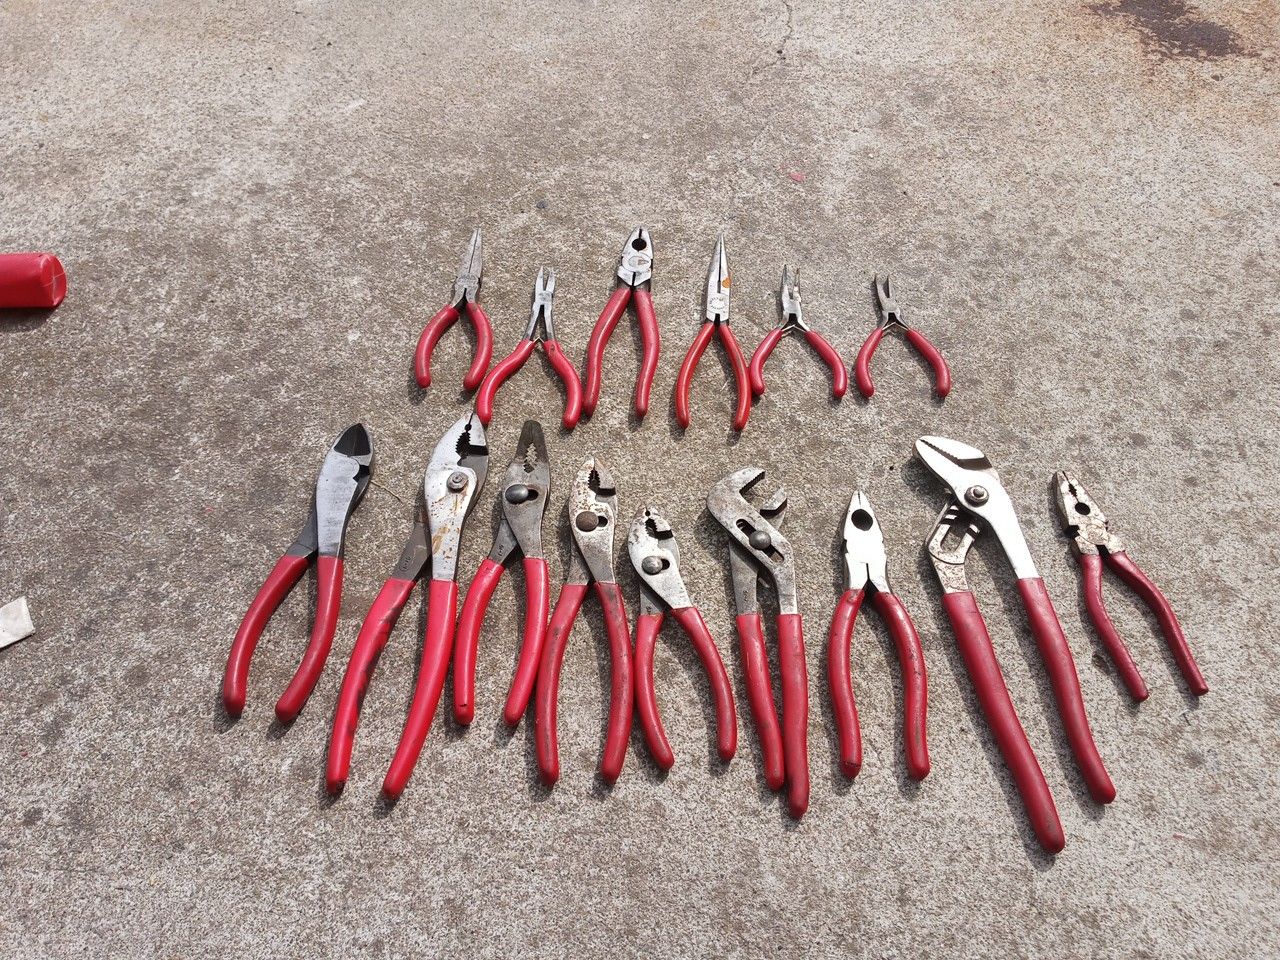 Mac snap-on pliers cutters combined Mac and snap-on brand